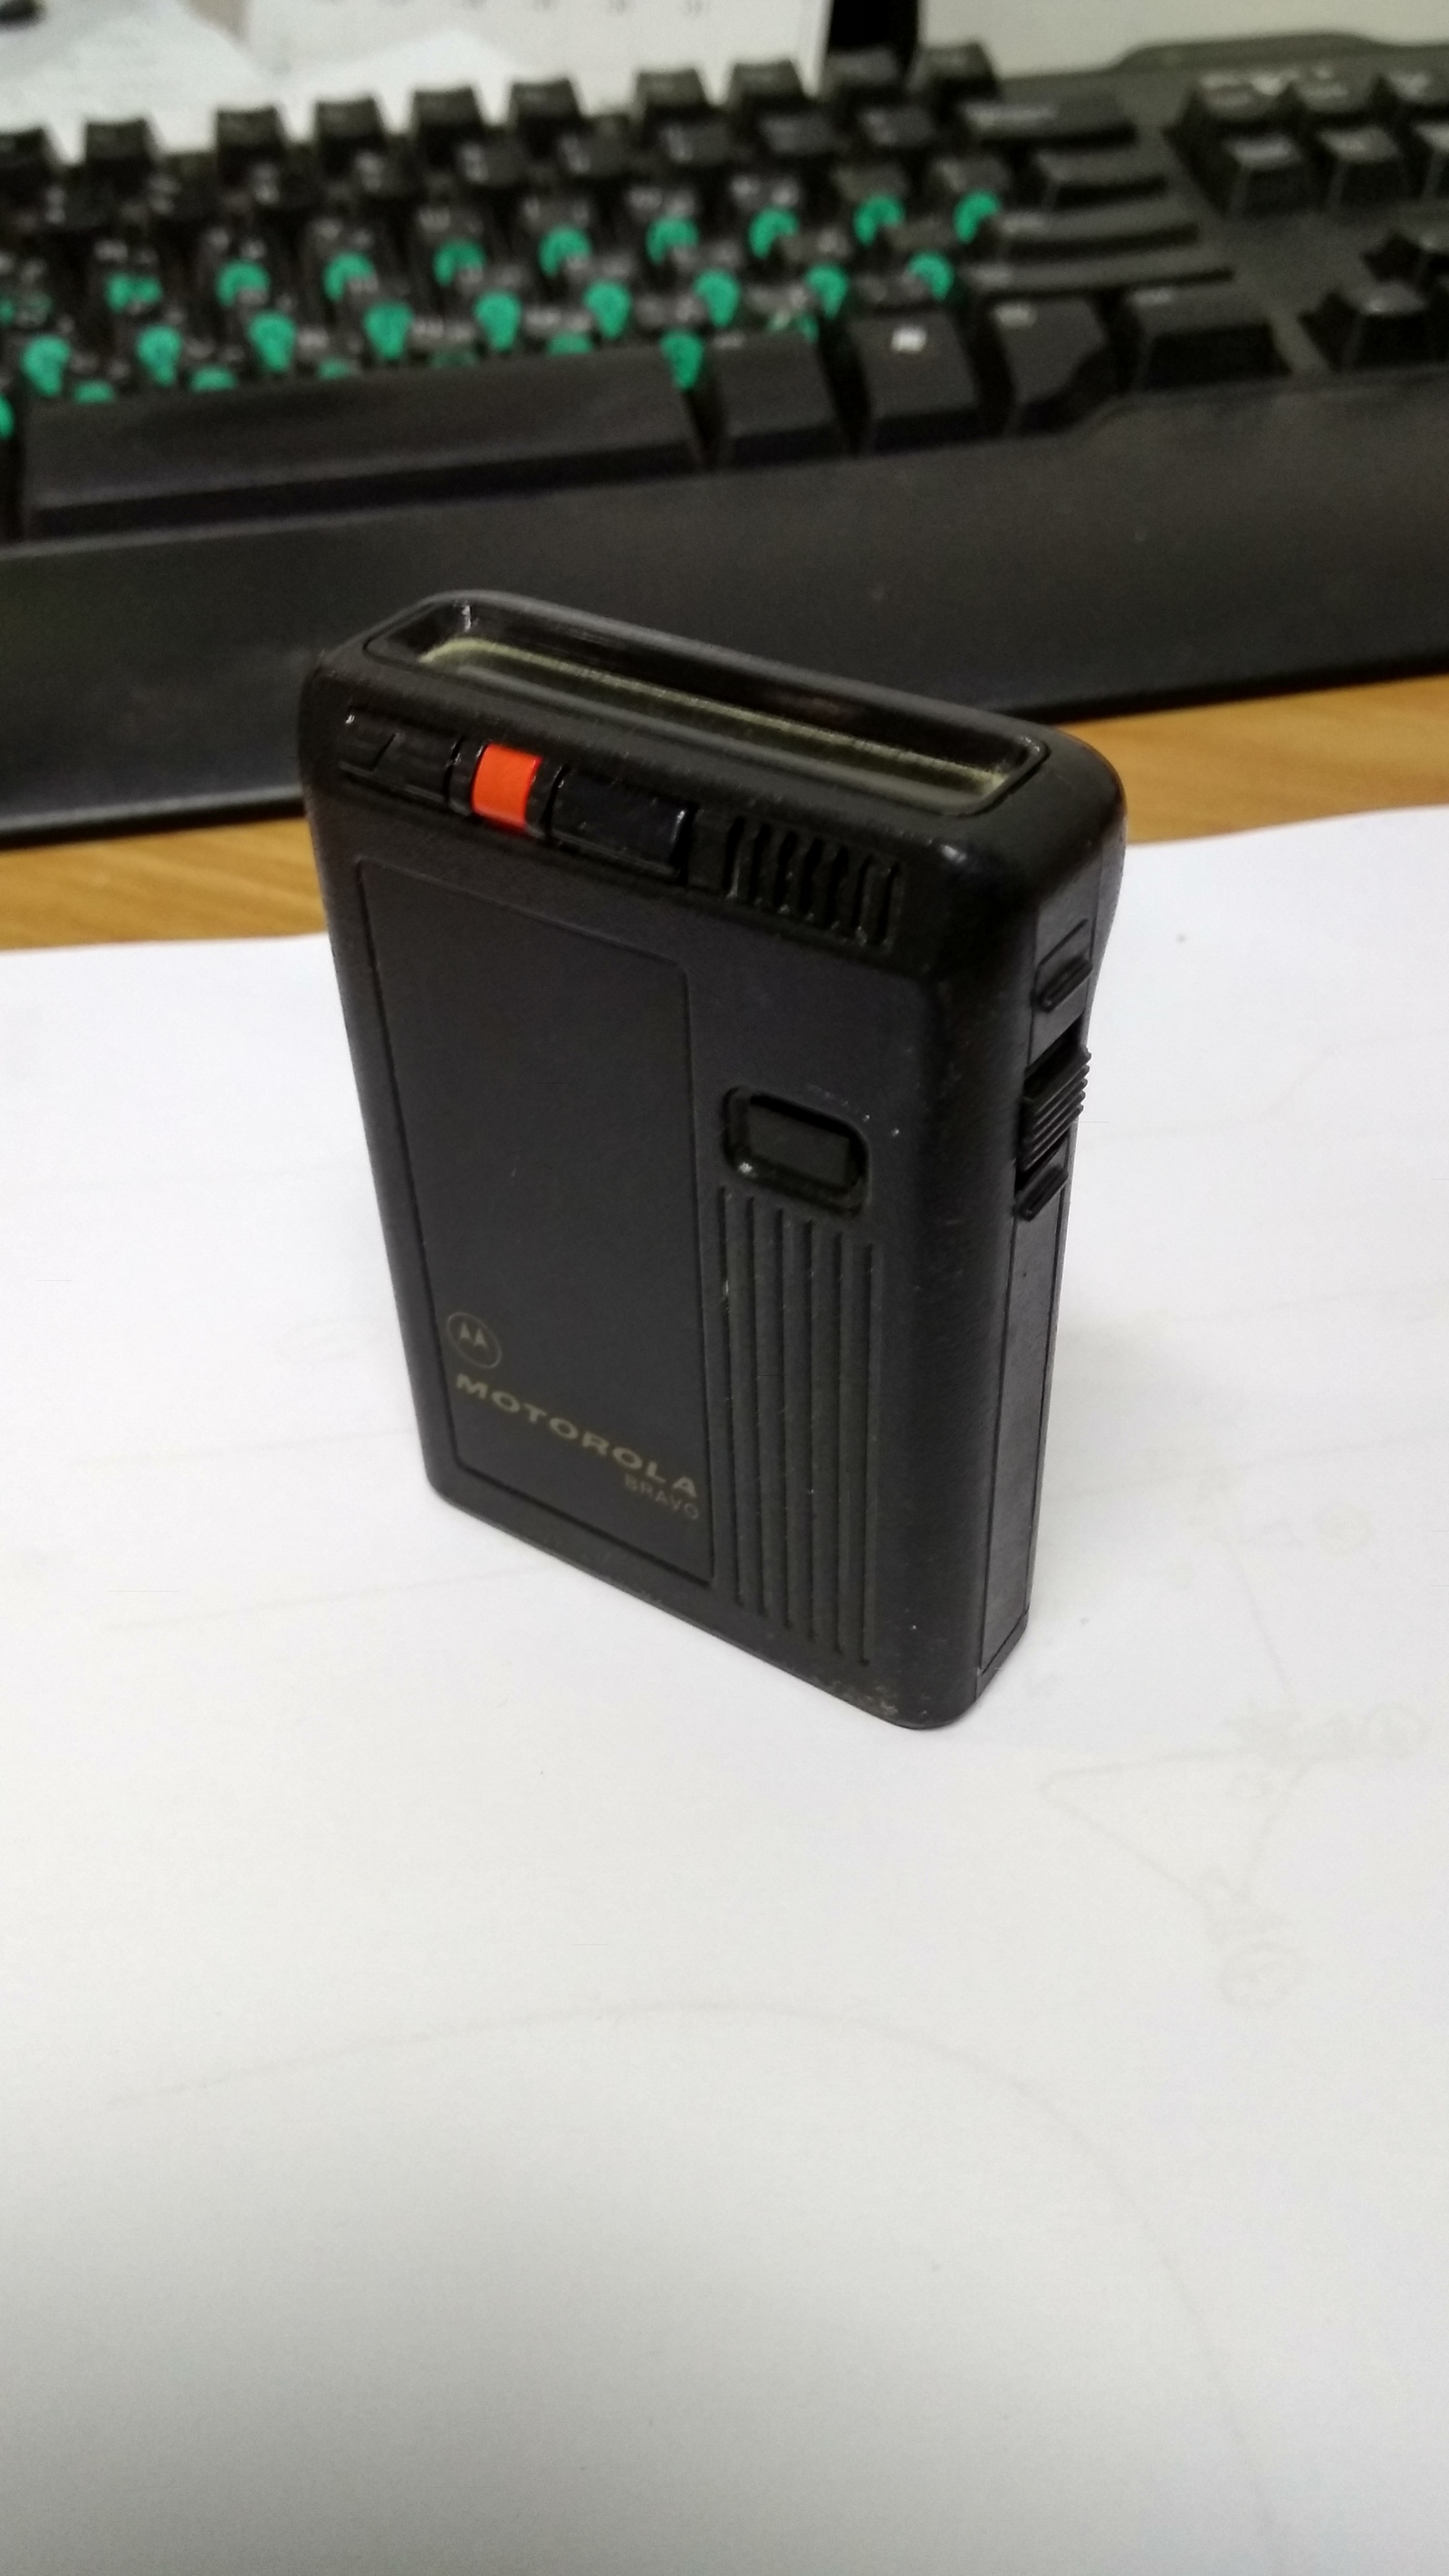 Beeper - My, Pager, Collection, Nostalgia